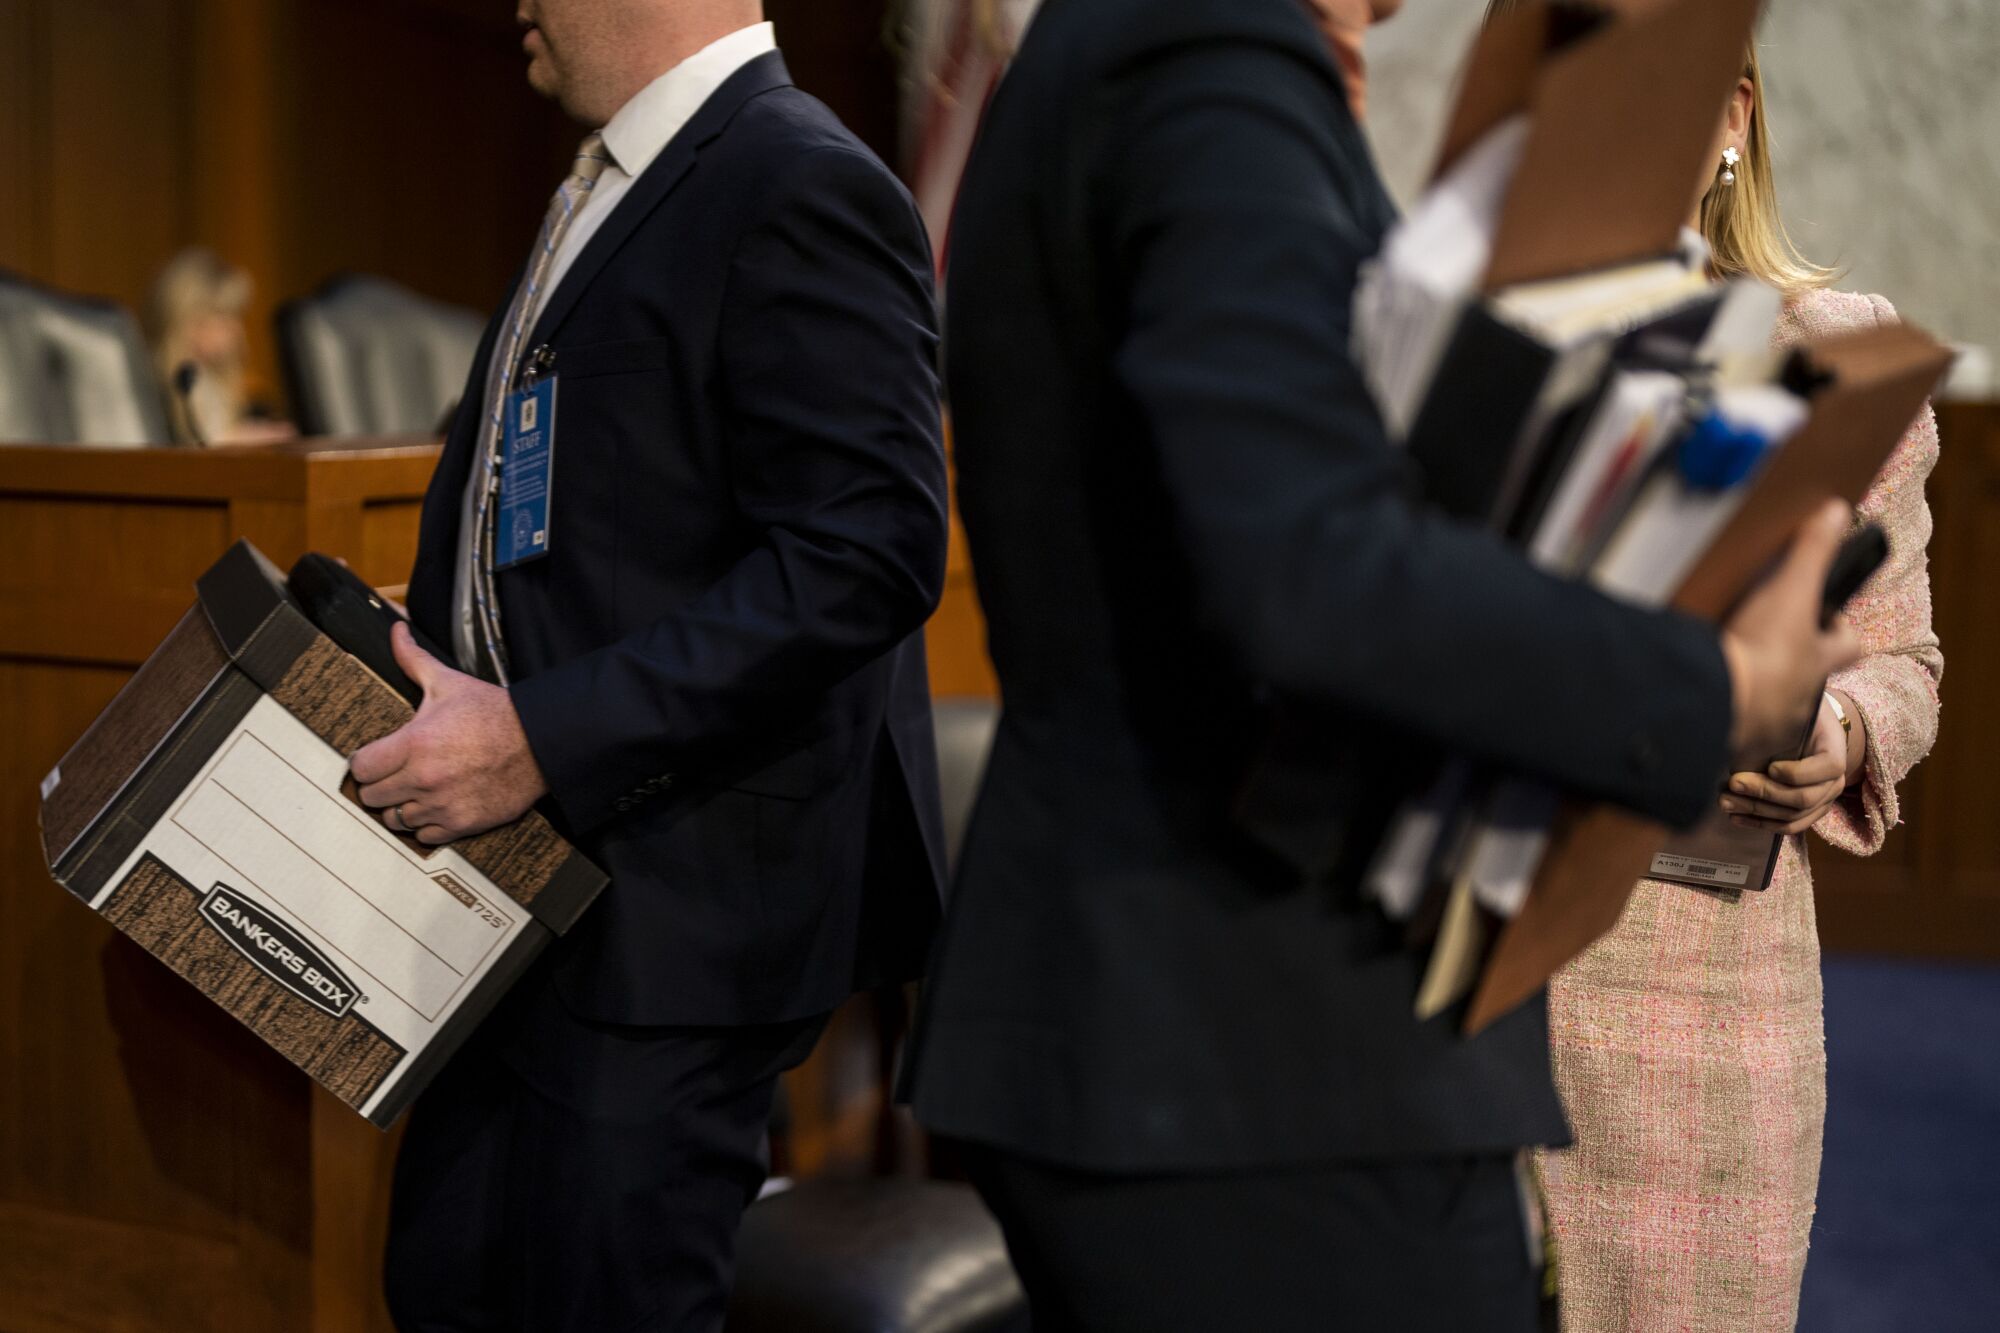 Staffers carry boxes and folders in and out of the Senate hearing room.